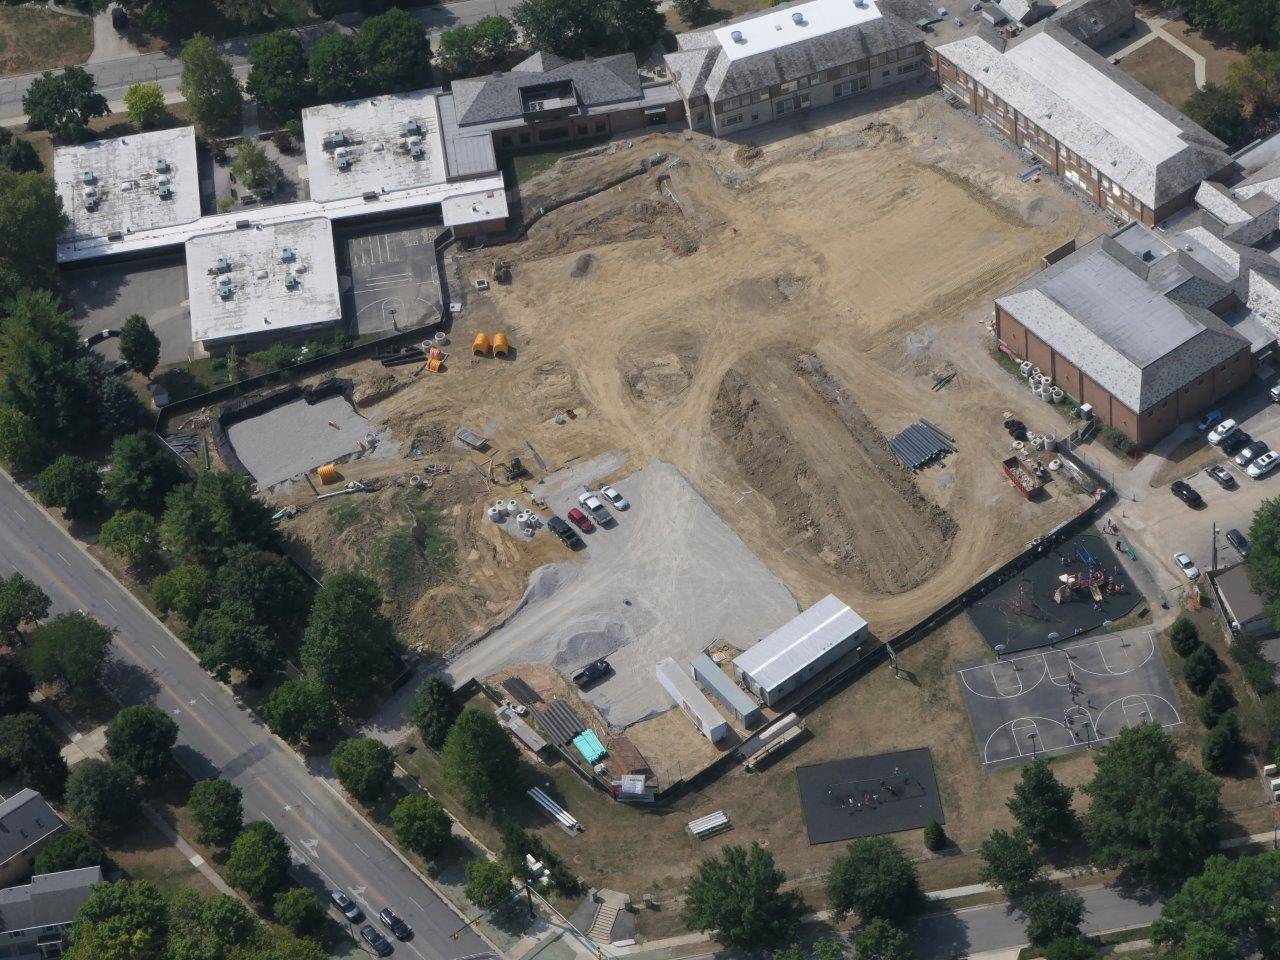 Site preparations for the addition to Barrington Elementary School